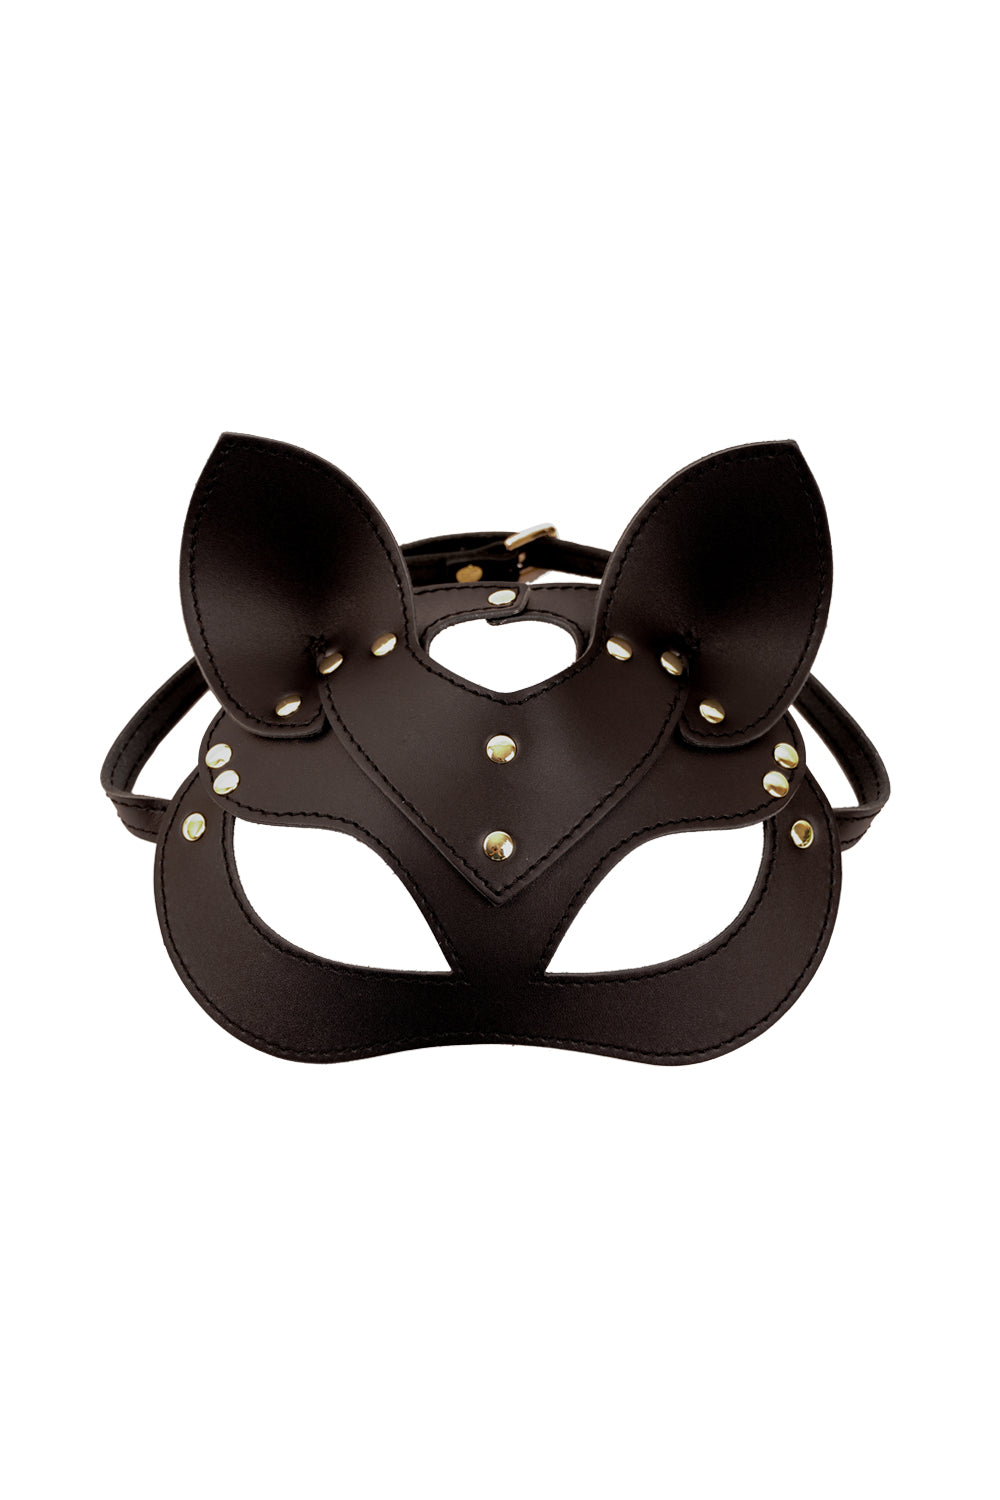 Leather сat mask, kitty fetish mask. Red